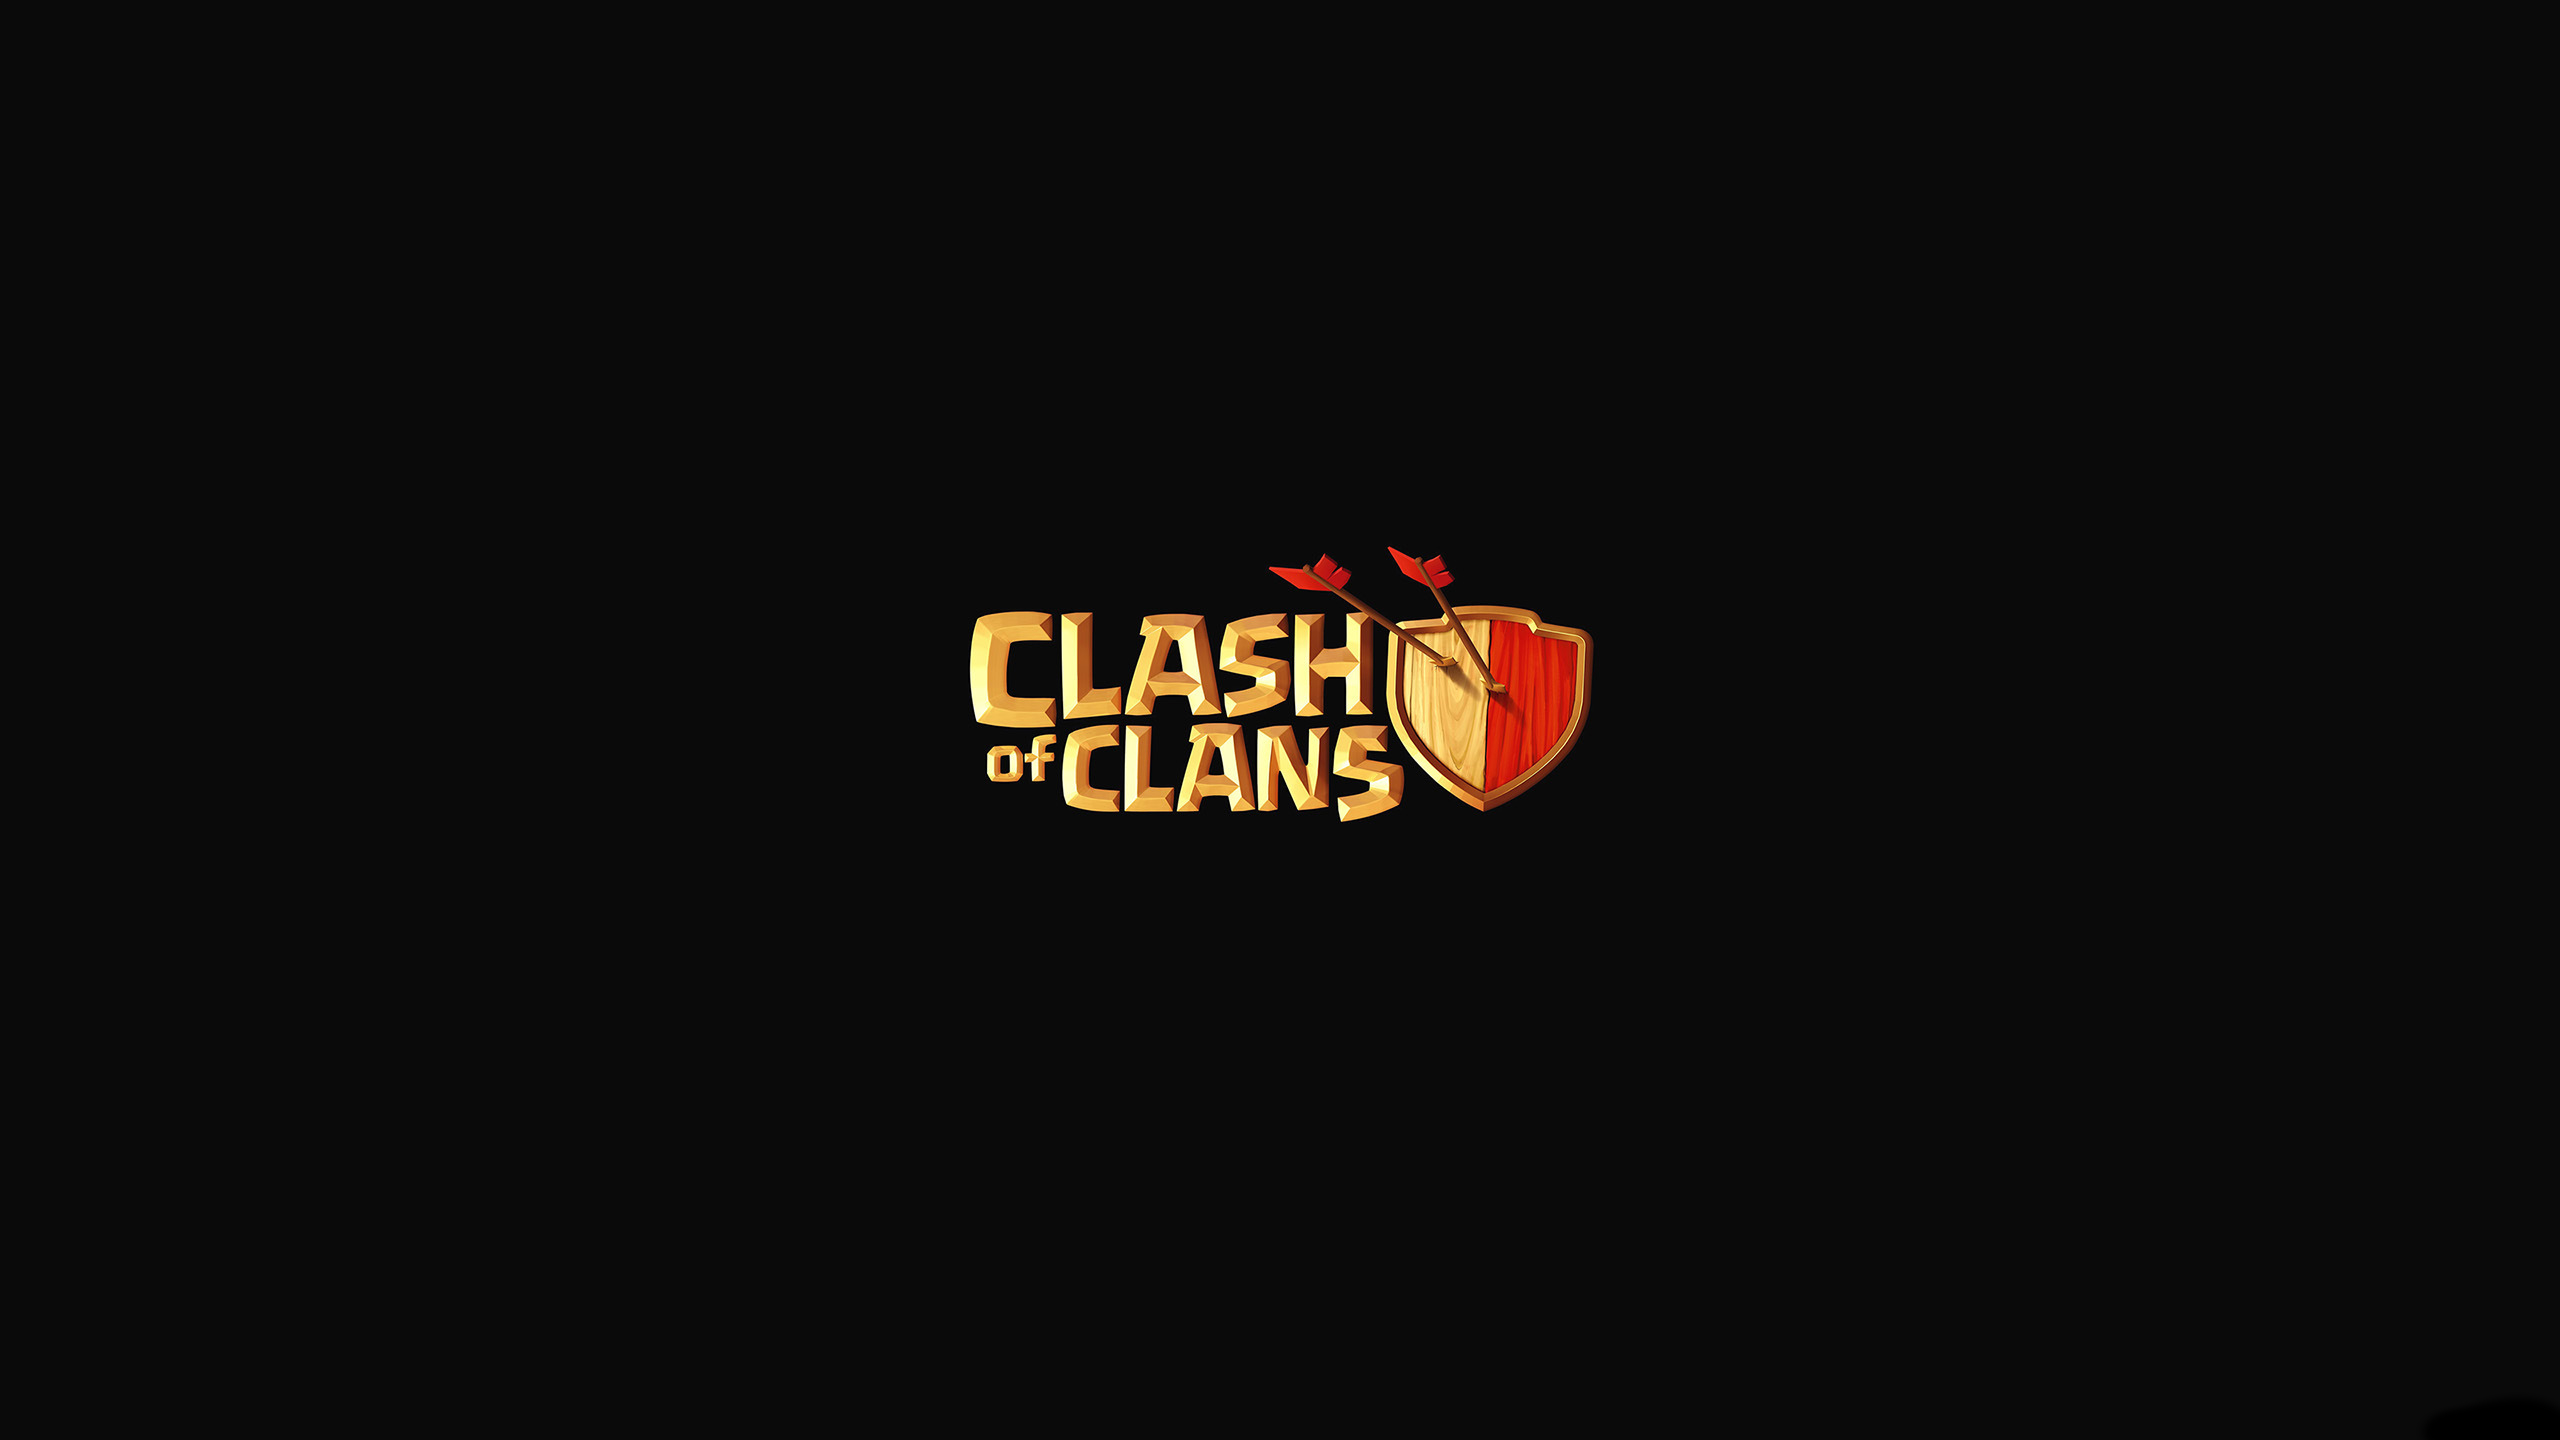 Video Game Clash Of Clans 2560x1440